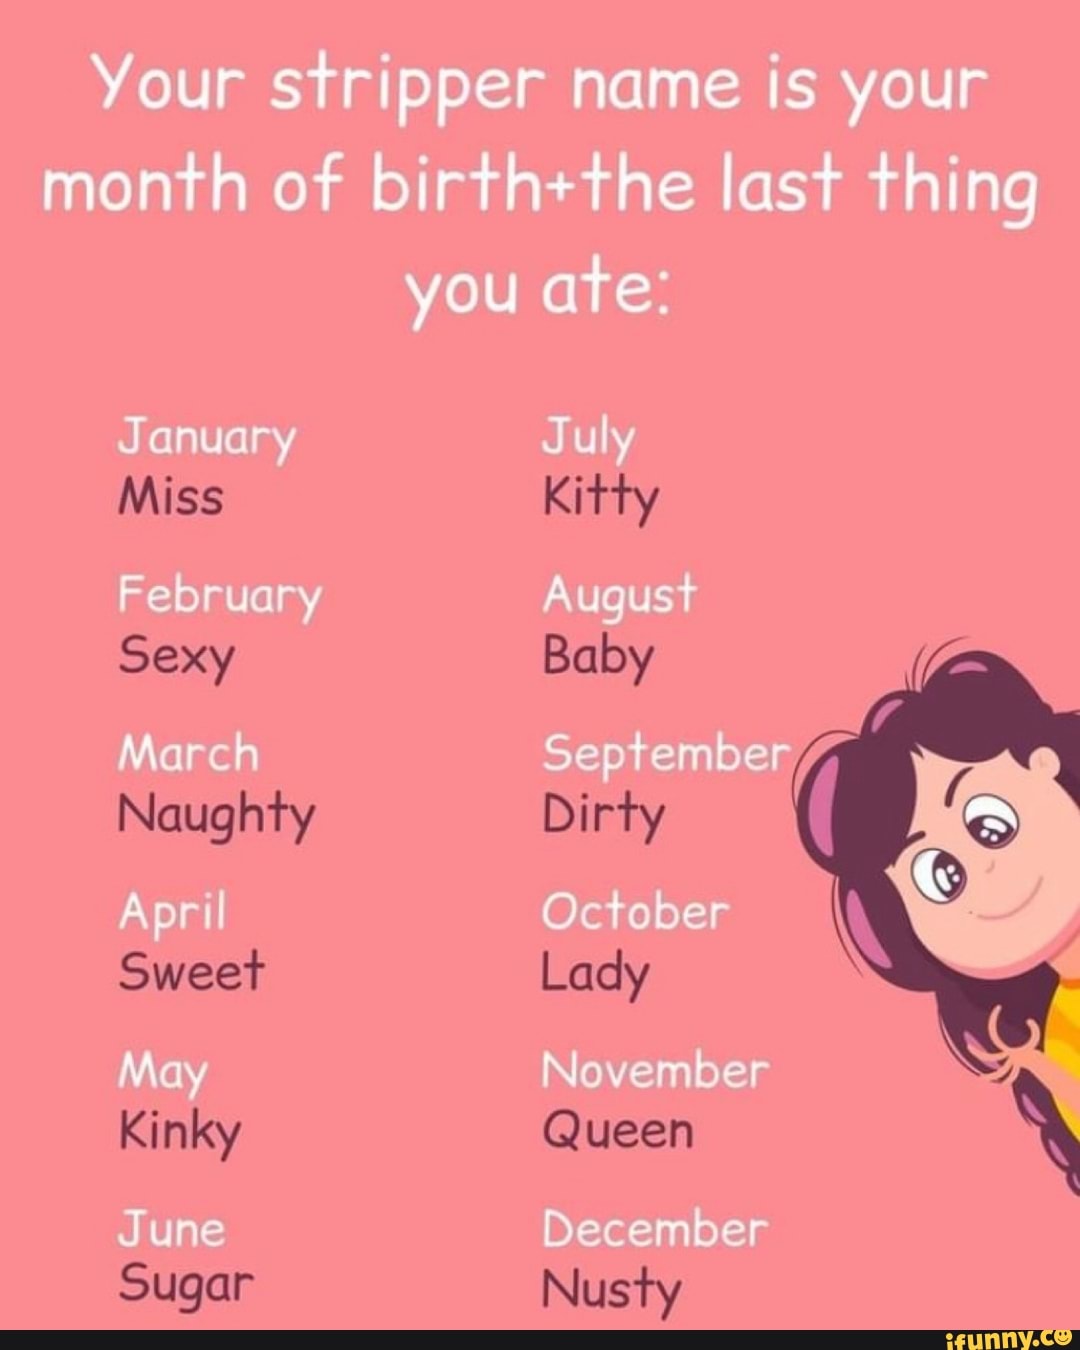 Miss Sexy Naughty Sweet Kinky Sugar Your stripper name your month of last t...